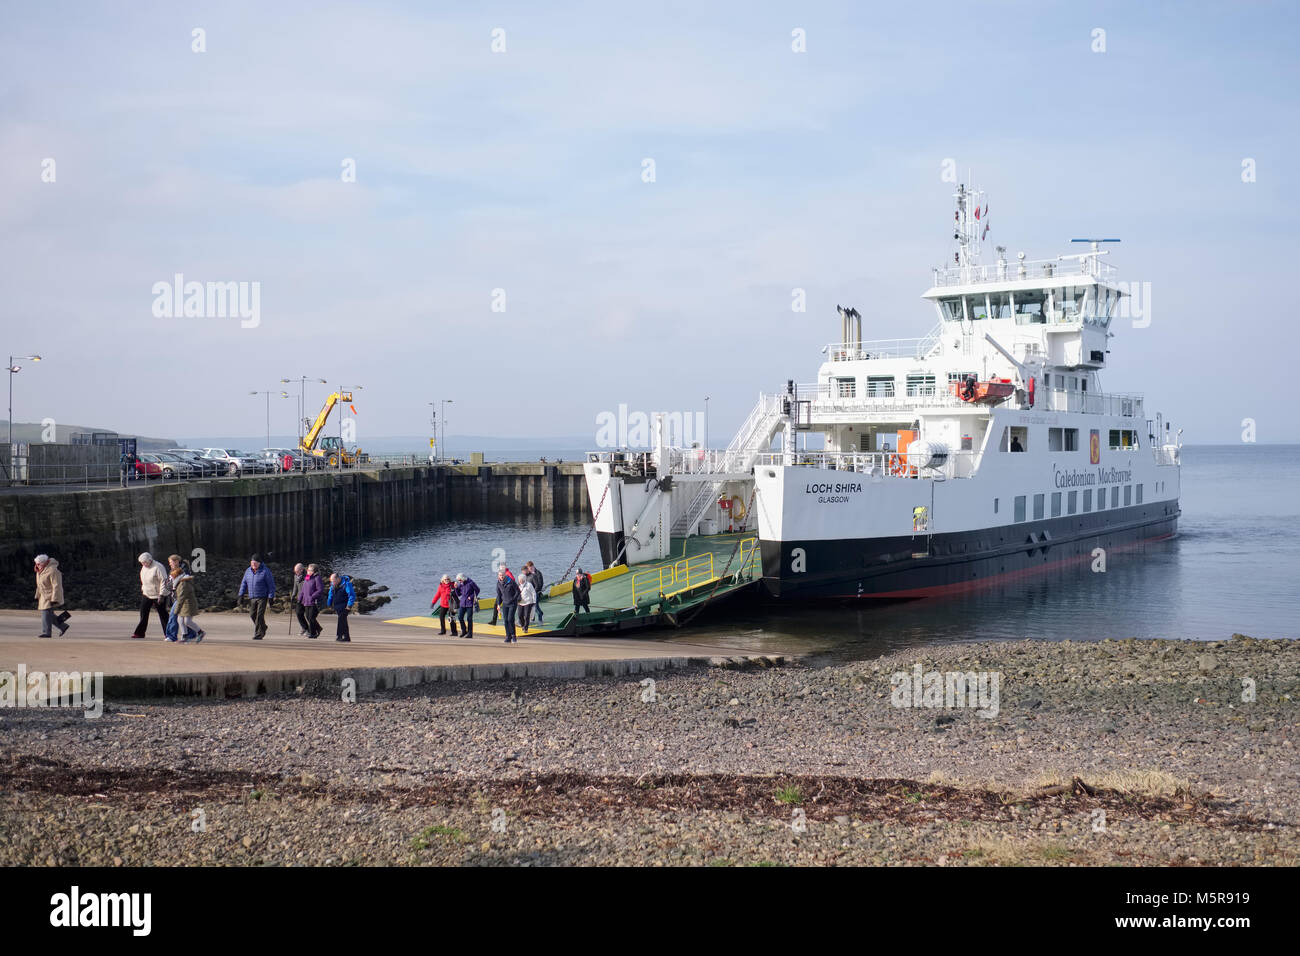 Ferry arrival at port dock with people passengers walking off board to island Stock Photo